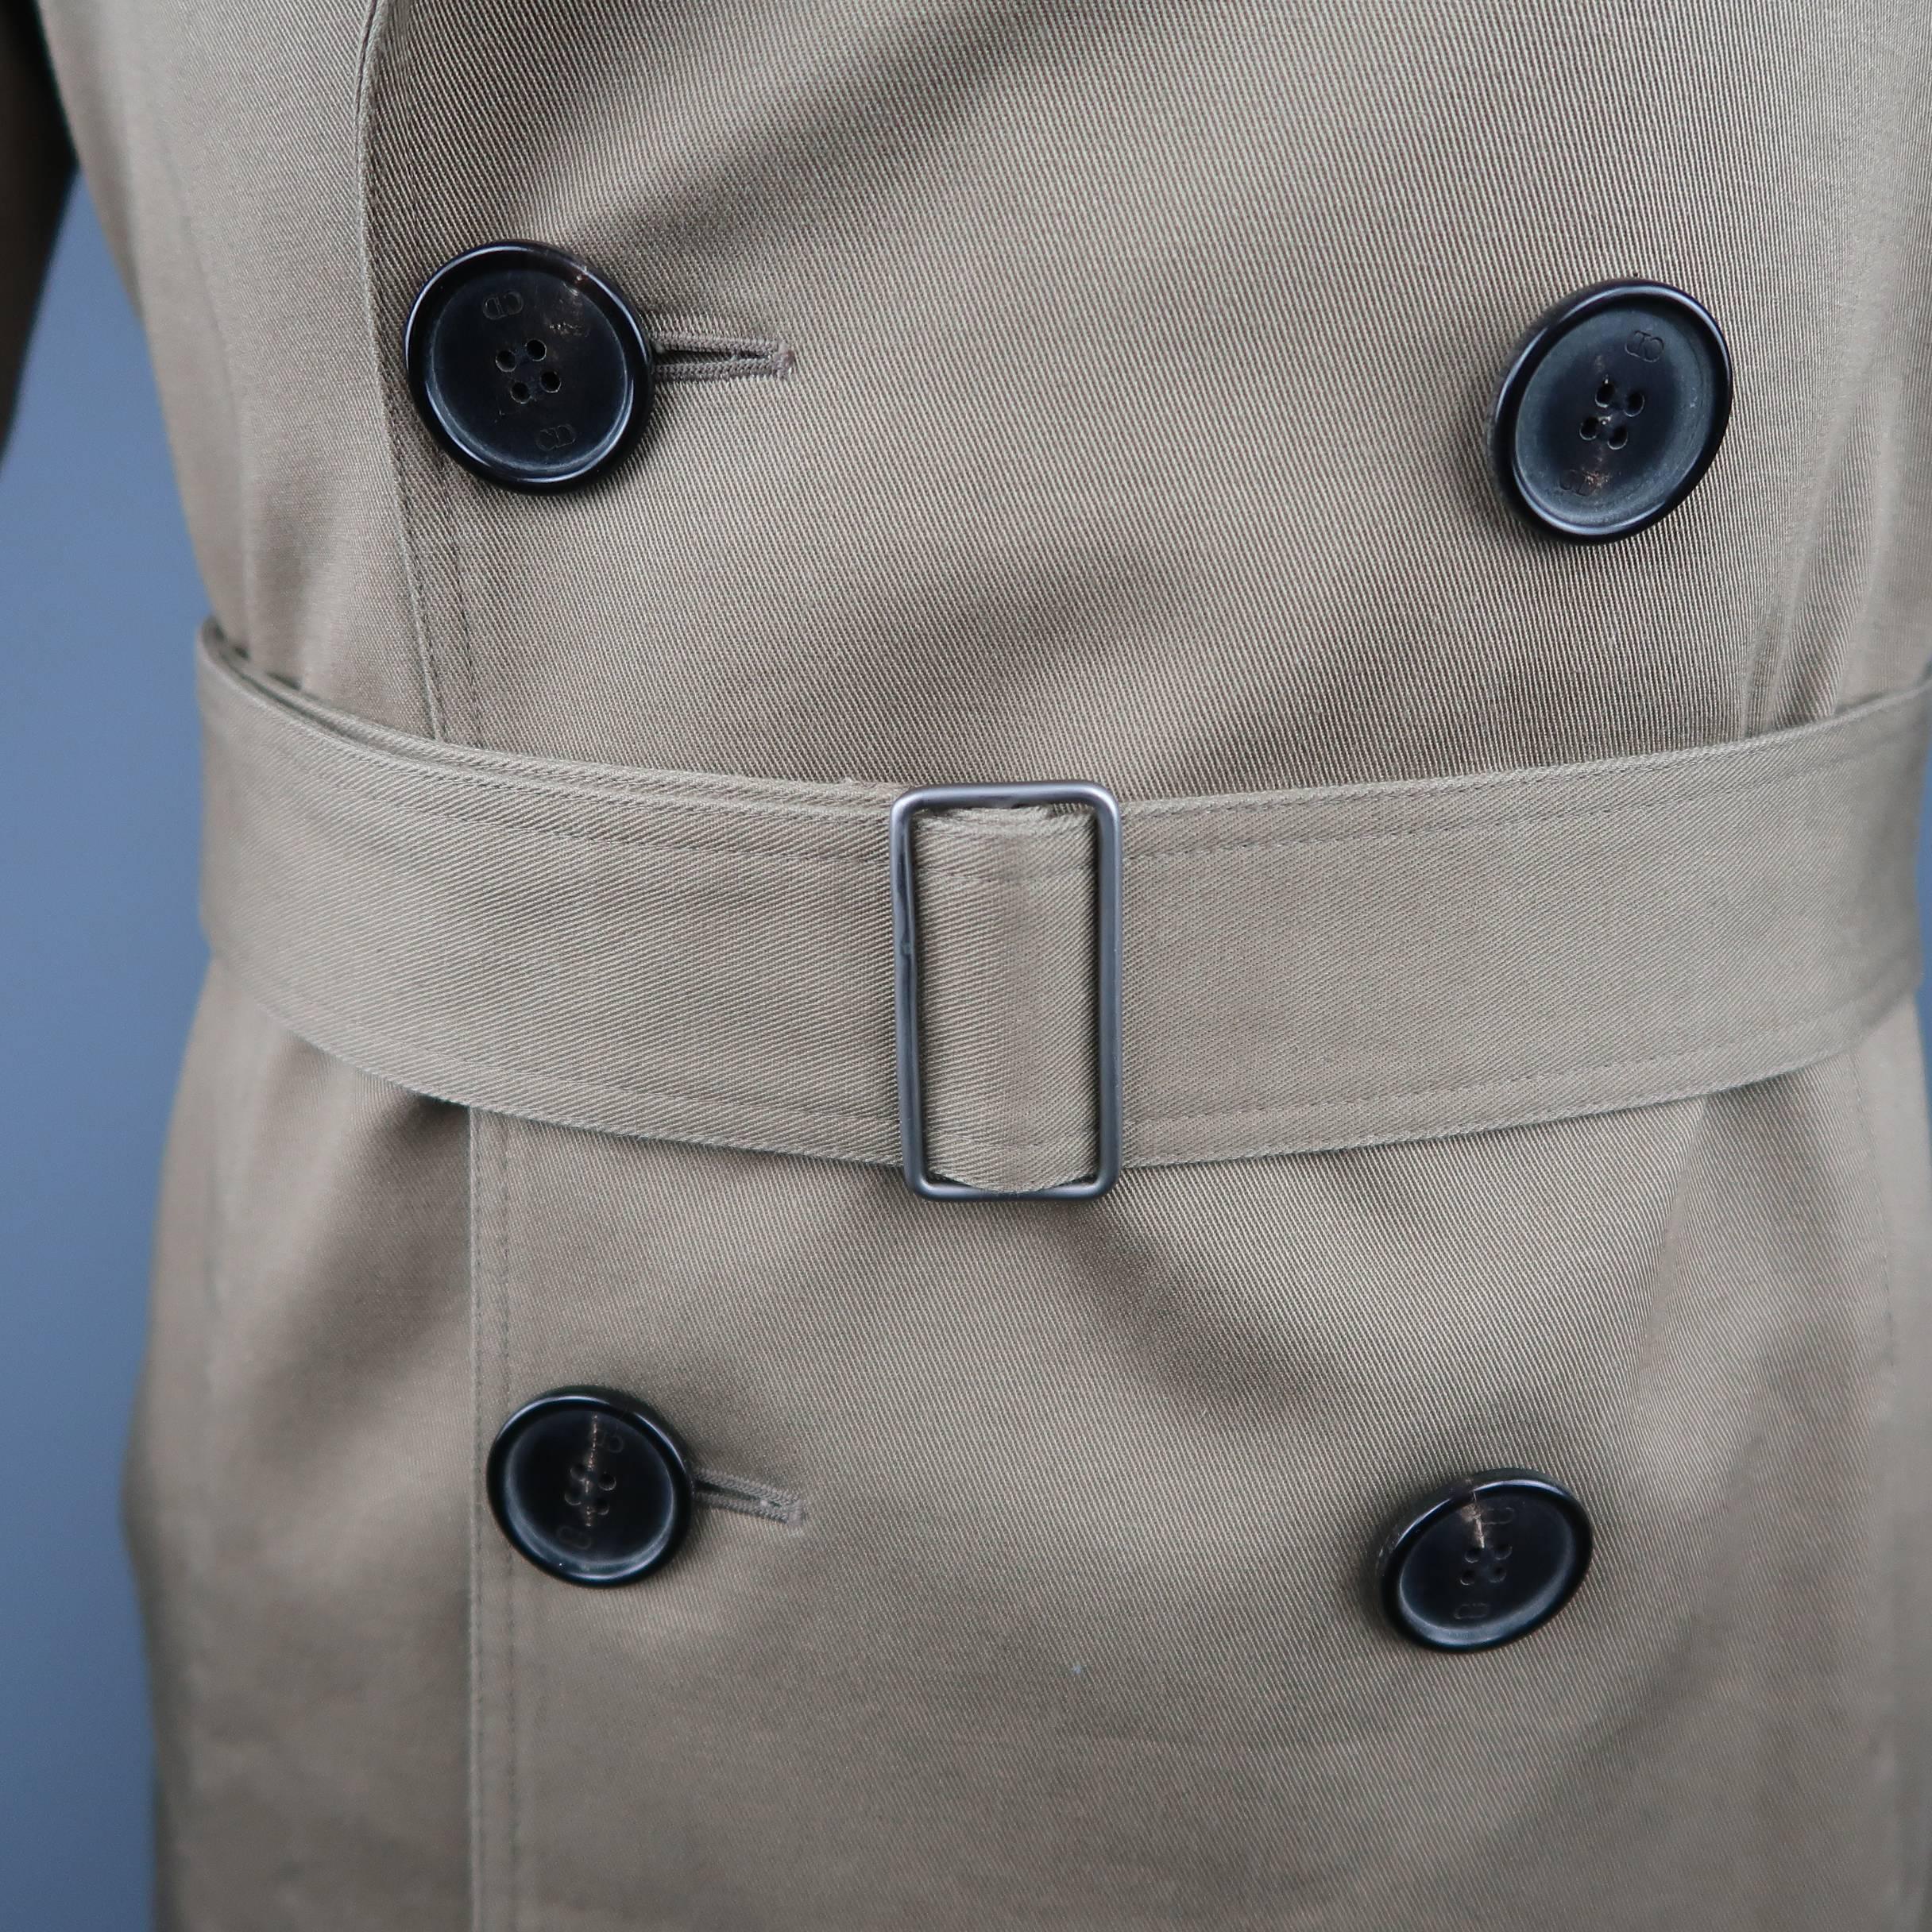 DIOR HOMME by Hedi Slimane comes in tan khaki cotton twill with a pointed lapel, double breasted button up front, slanted pockets, storm flap collar, epaulets, and optional waist belt. Made in Italy.
 
Excellent Pre-Owned Condition.
Marked: IT 48
